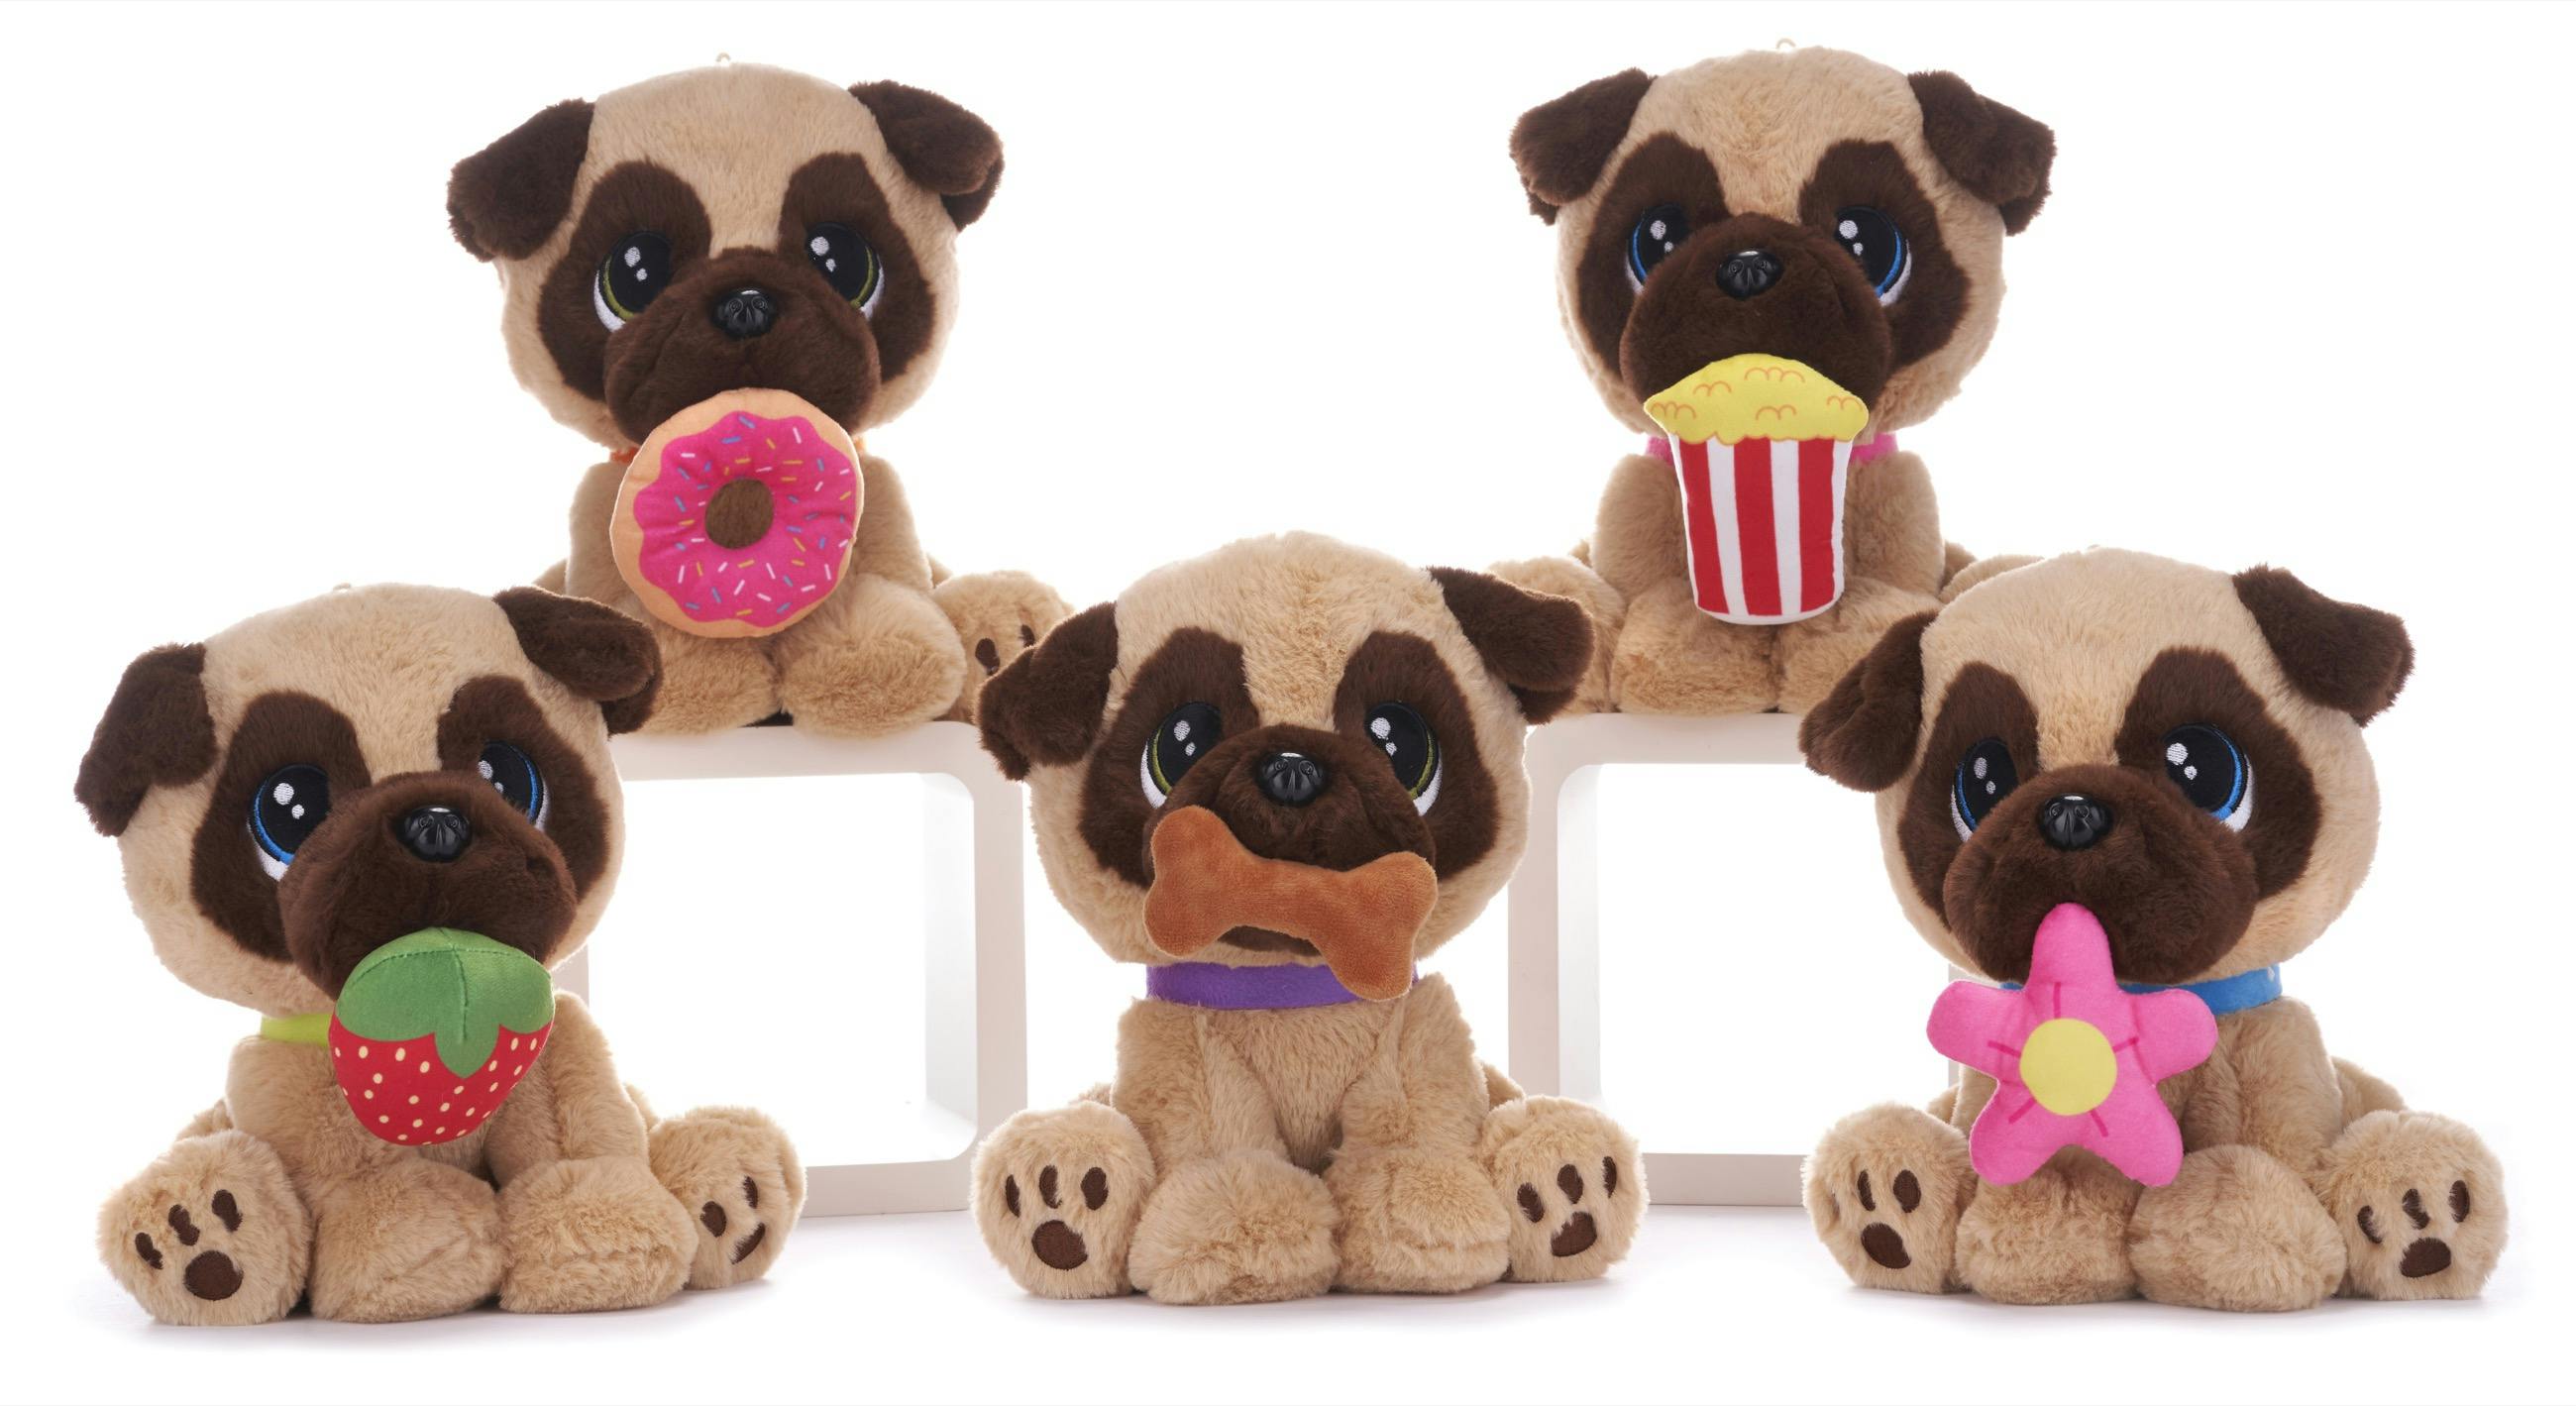 Product - Pugs with Items in Mouth and Beanbag